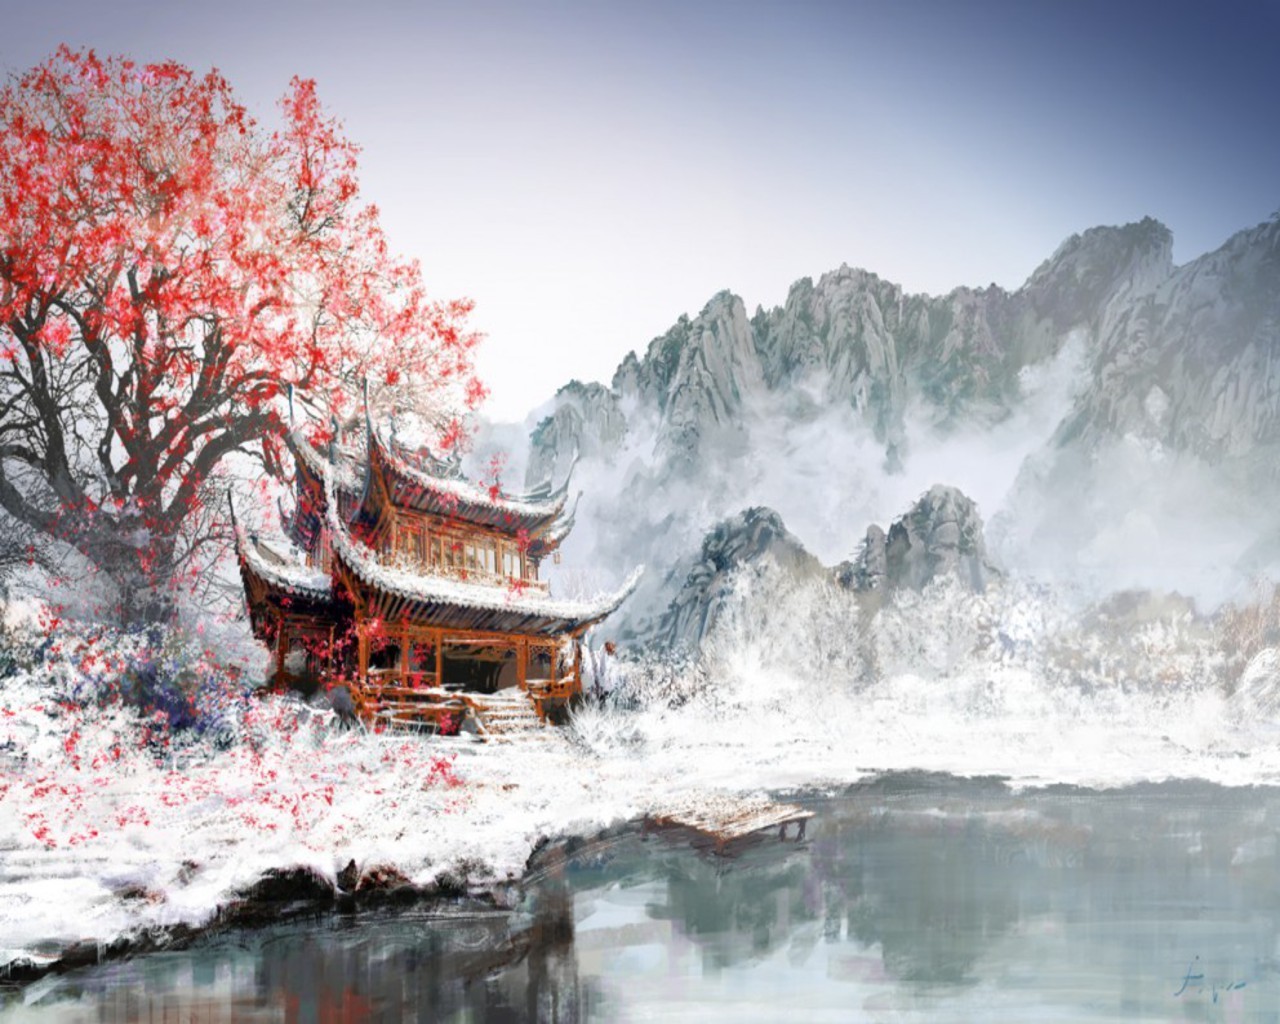 General 1280x1024 landscape painting Asia trees Japan winter snow ice cold nature building